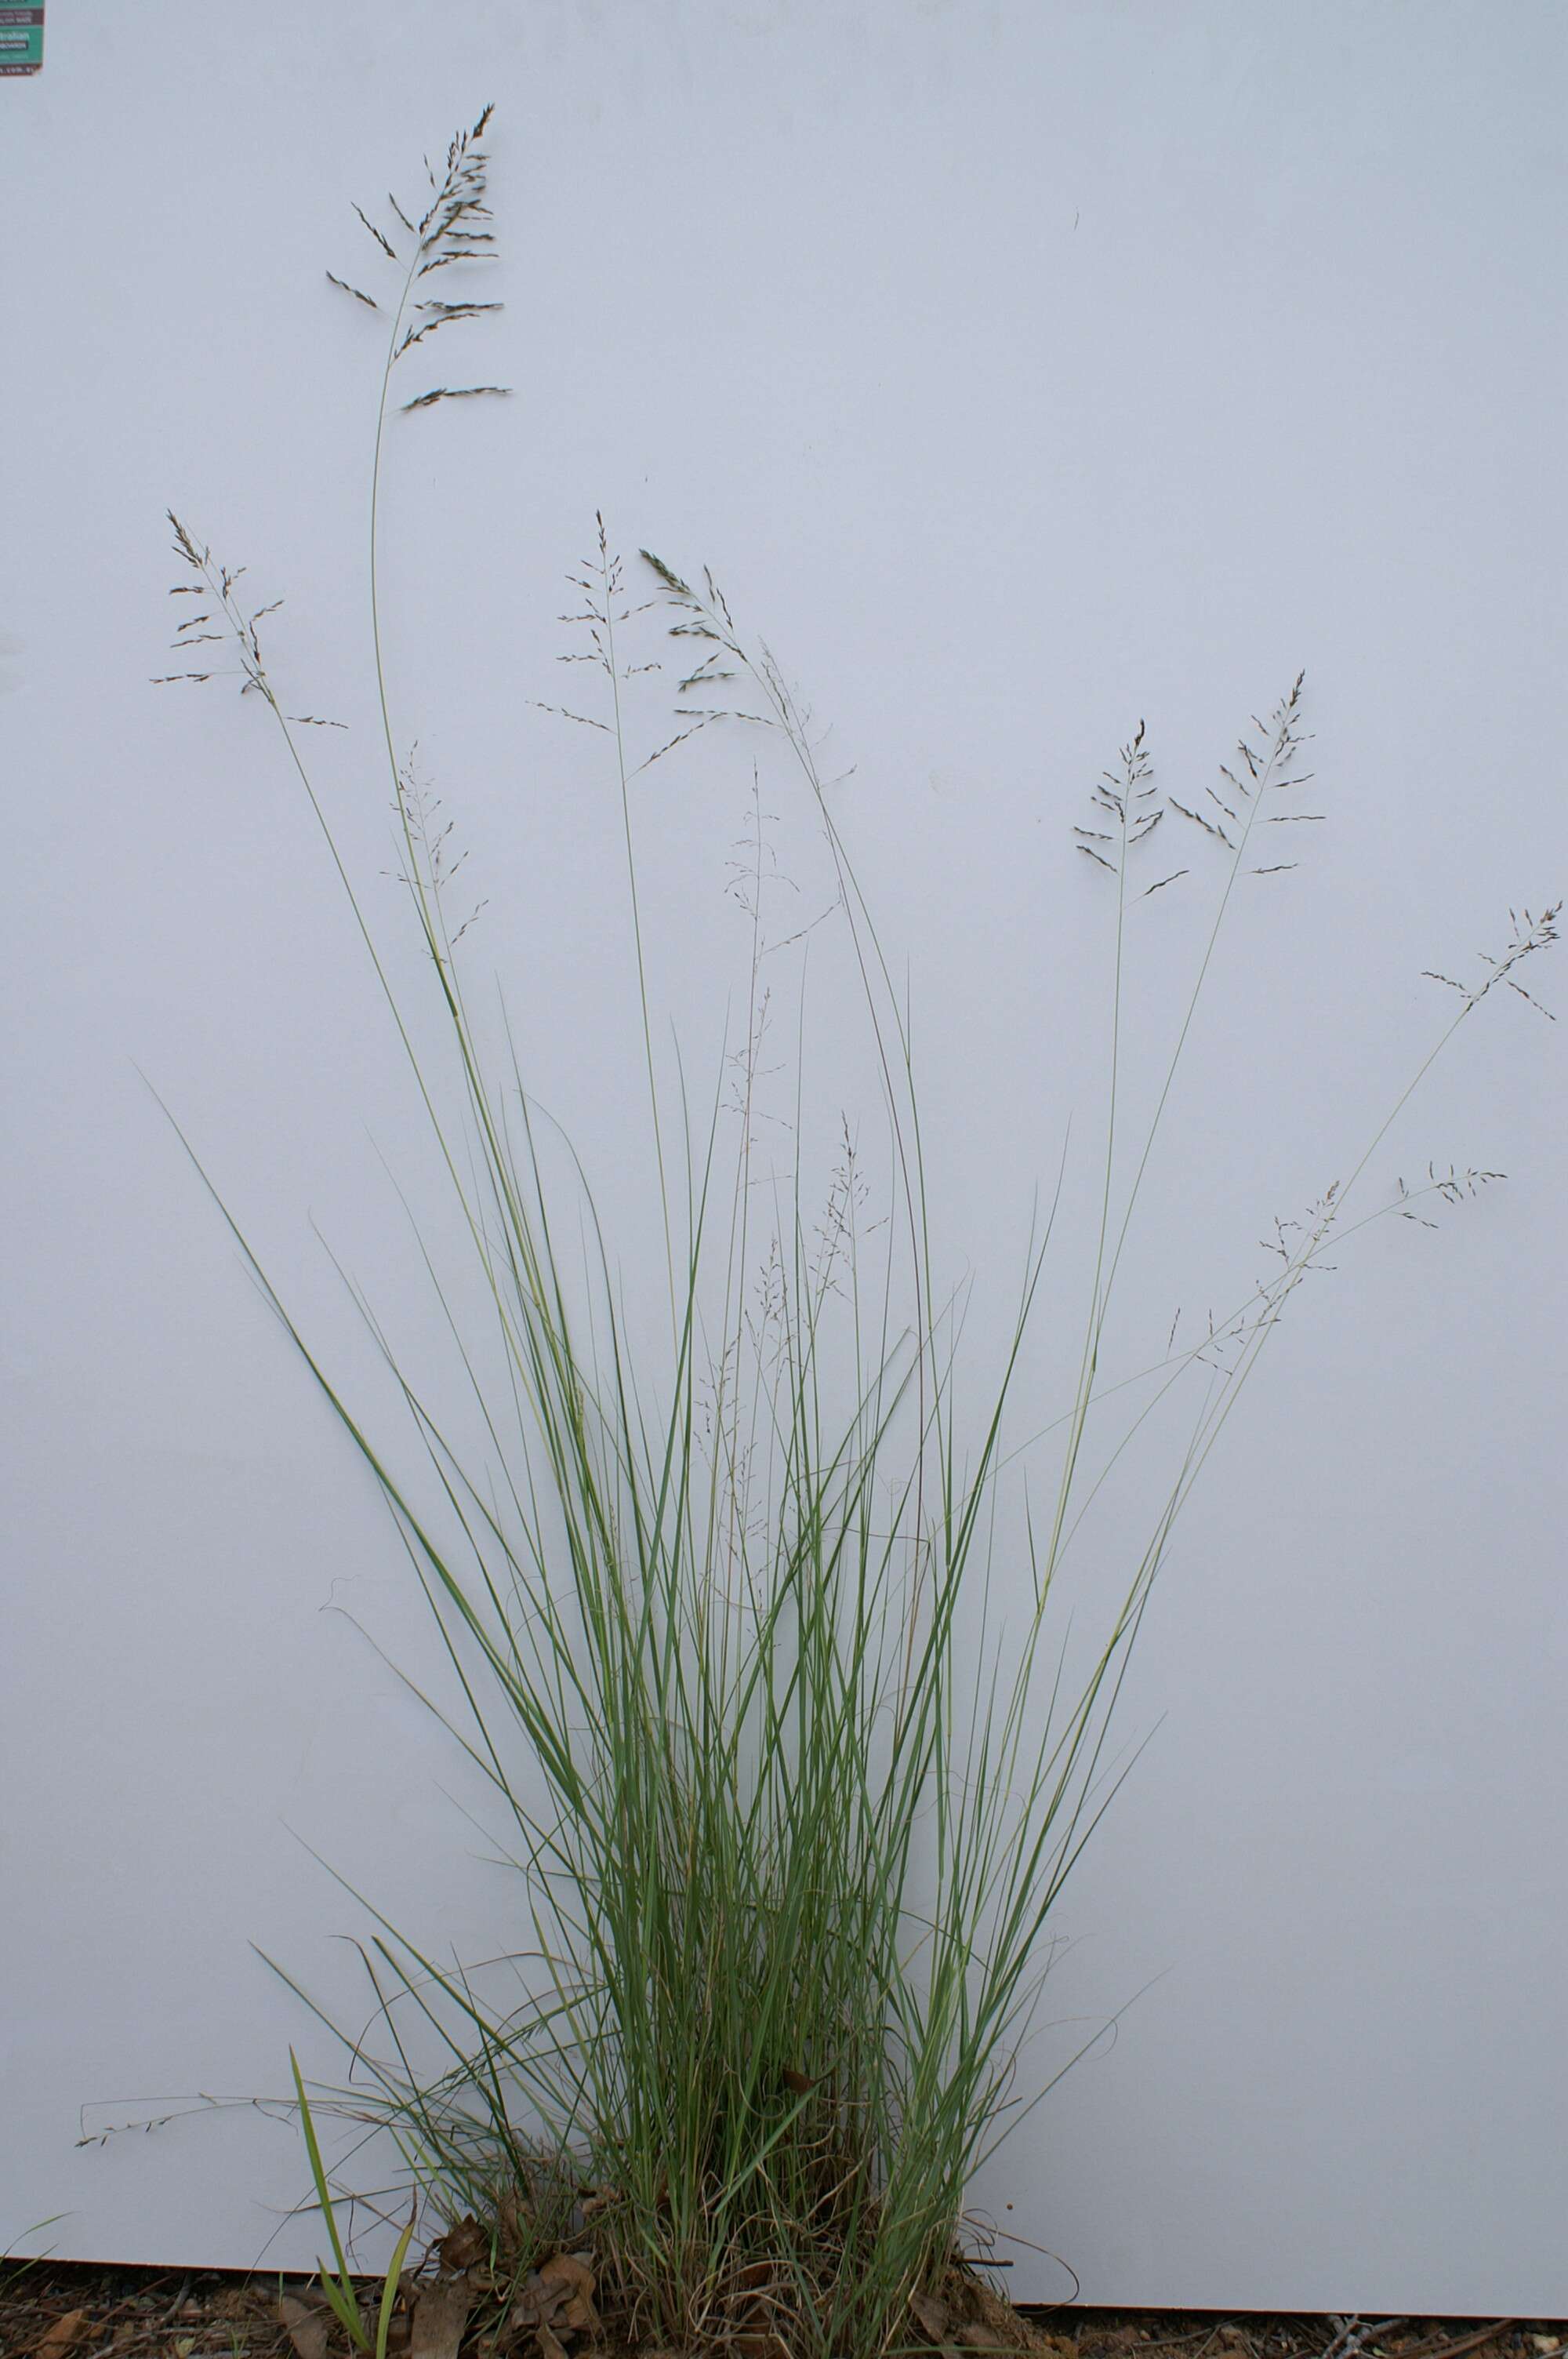 Image of weeping lovegrass